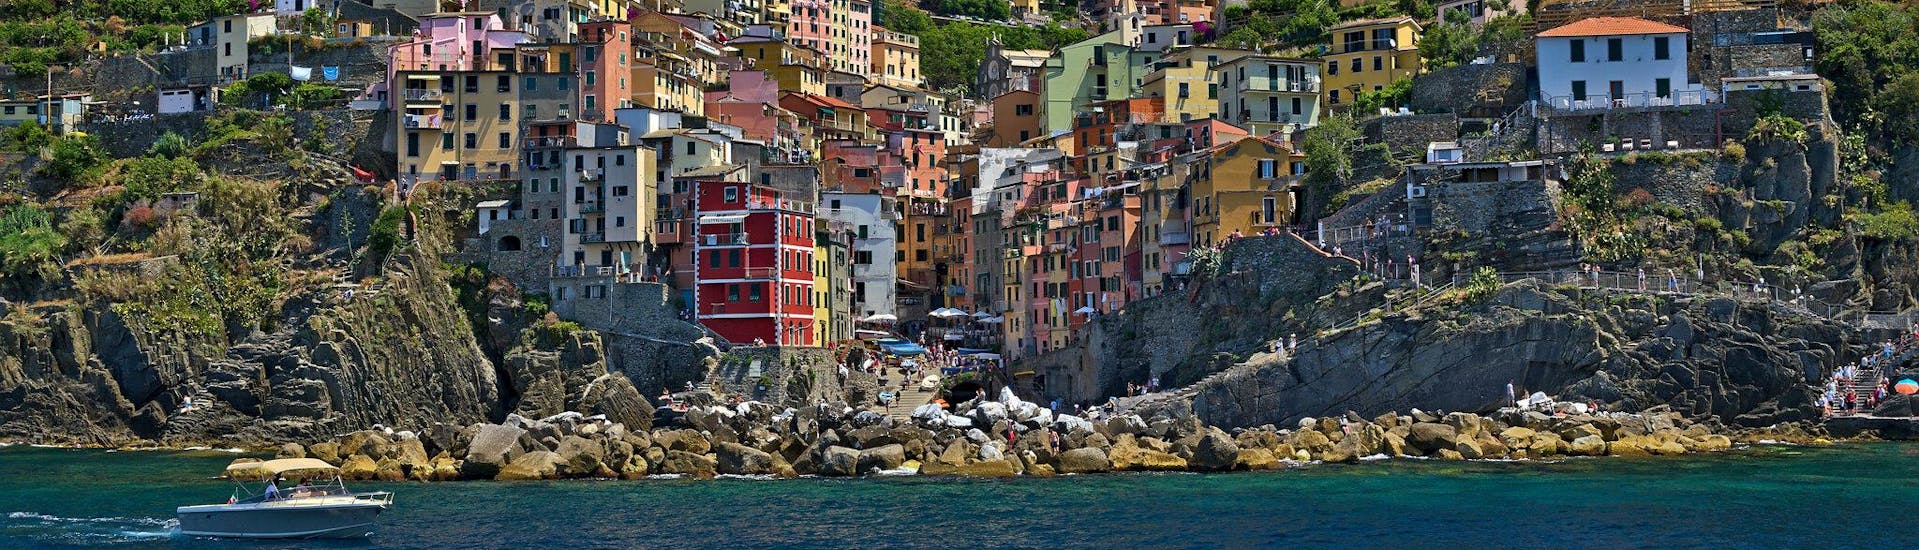 View of the coast during a boat trip to Riomaggiore.